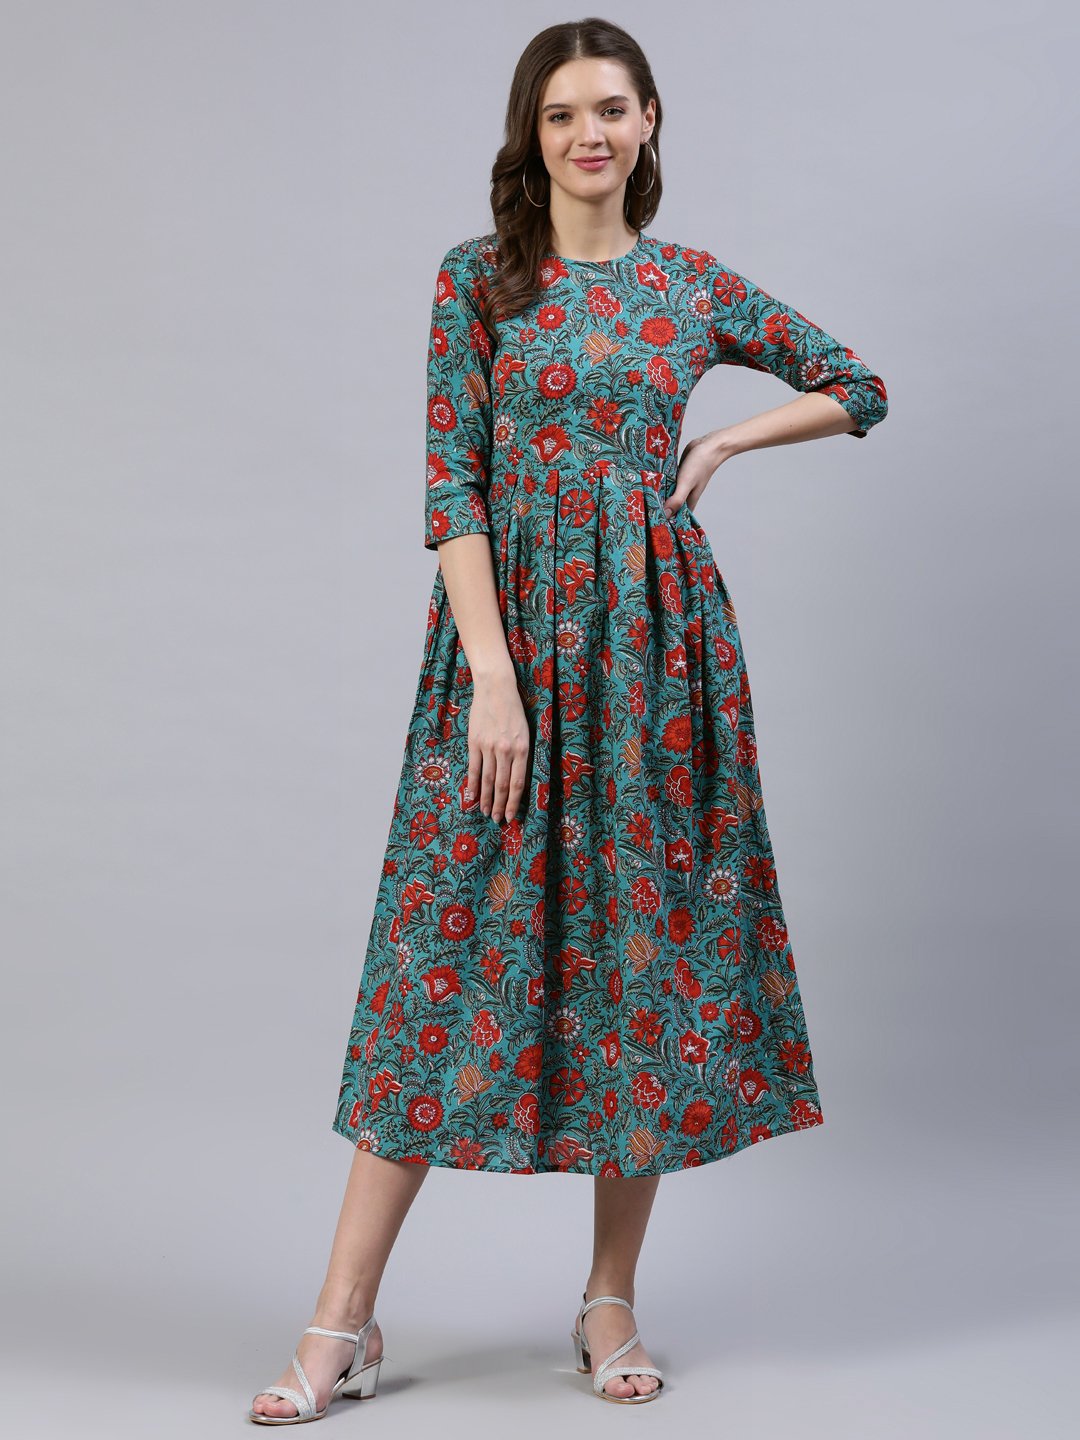 Women's Green Floral Printed Dress With Three Quarter Sleeves - Nayo Clothing